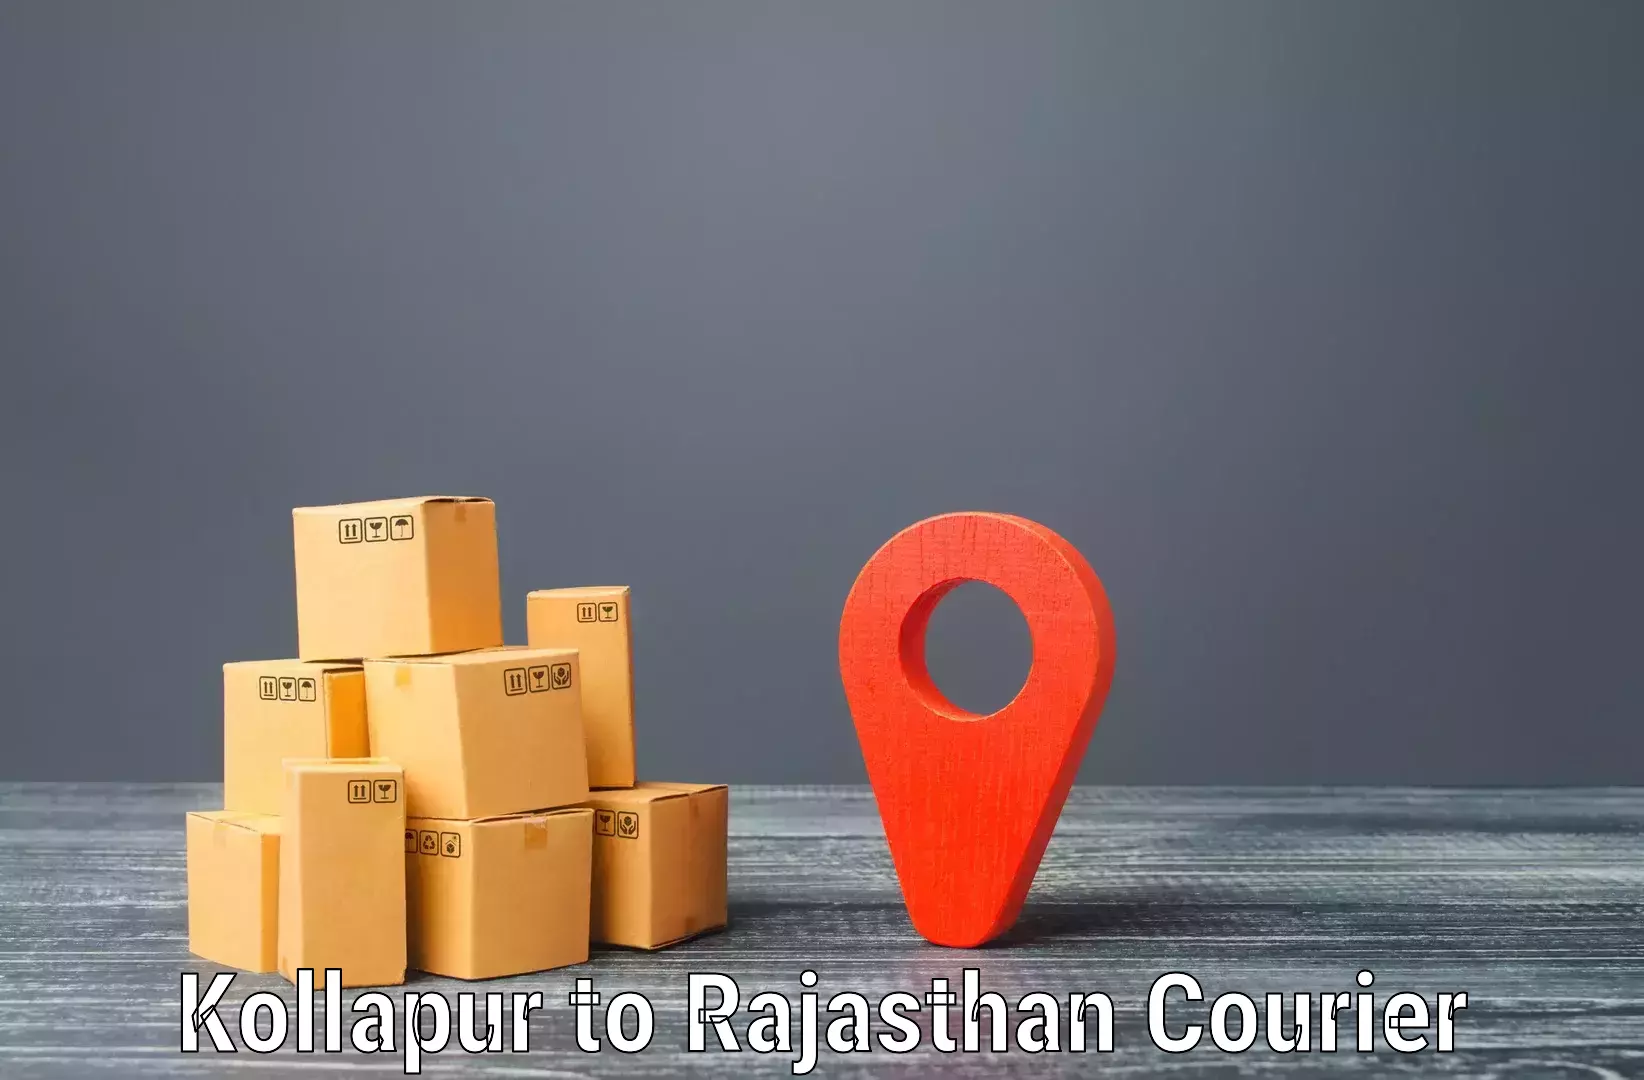 Express delivery capabilities Kollapur to Jaipur